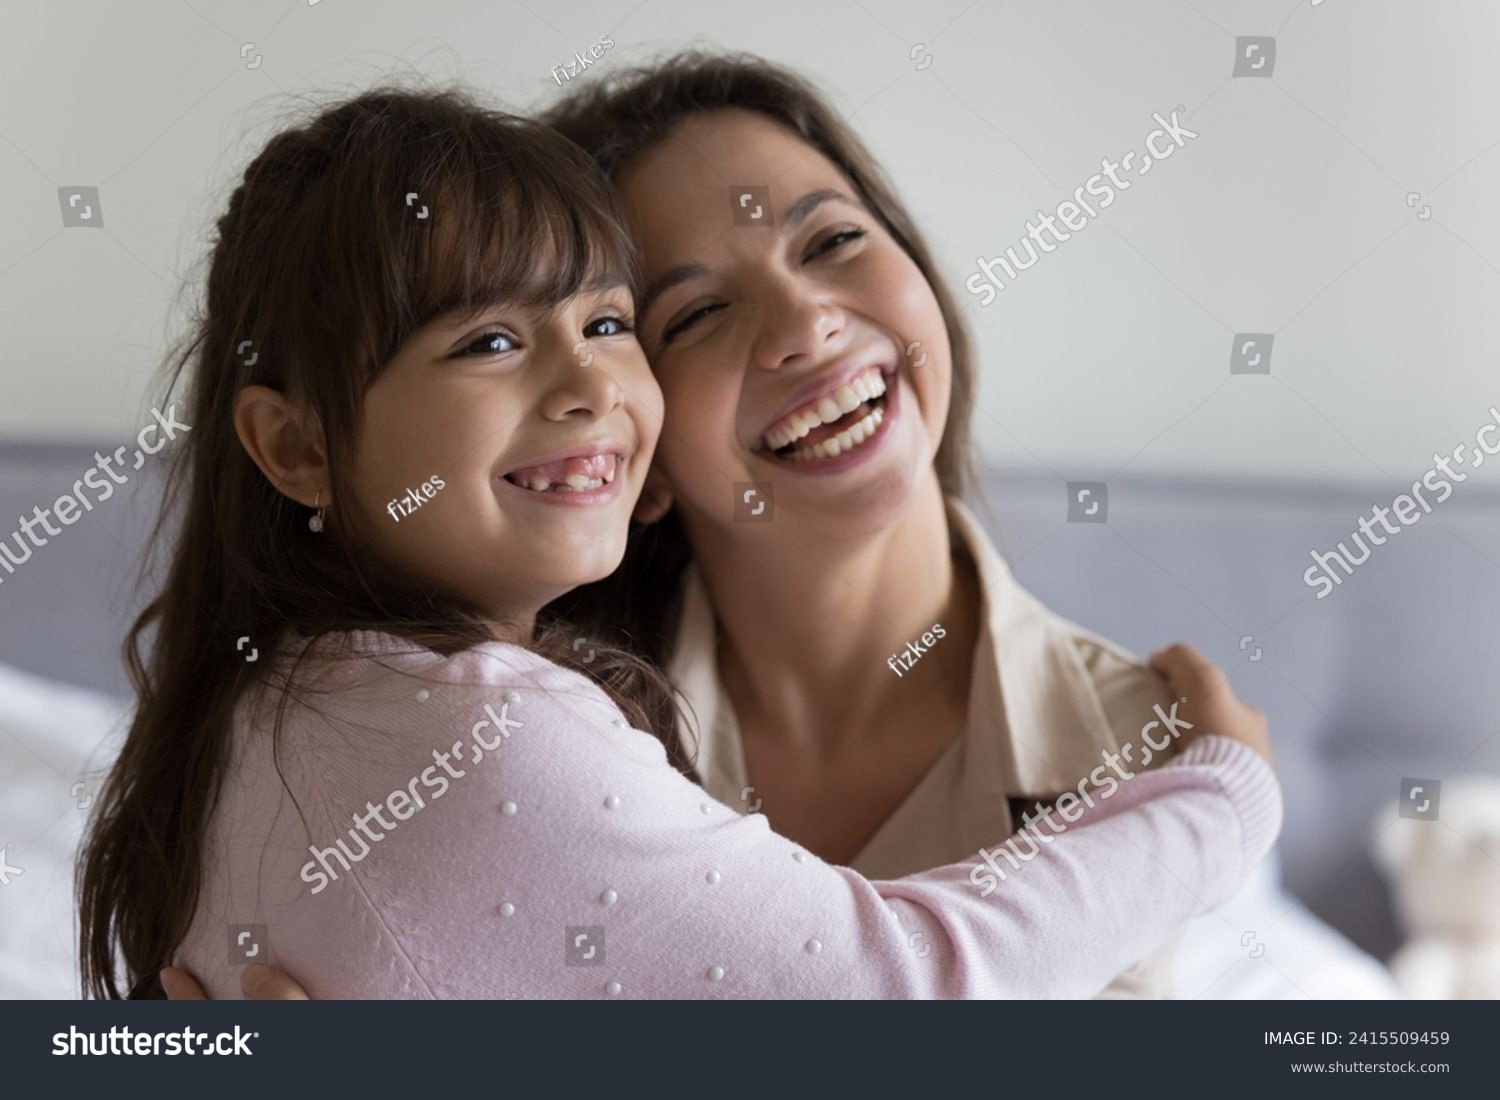 Close up of joyful little girl spend leisure time at home with loving mother, cute daughter hug caring young mom, smiling, look away, happy family express love and affection, enjoy strong family ties #2415509459